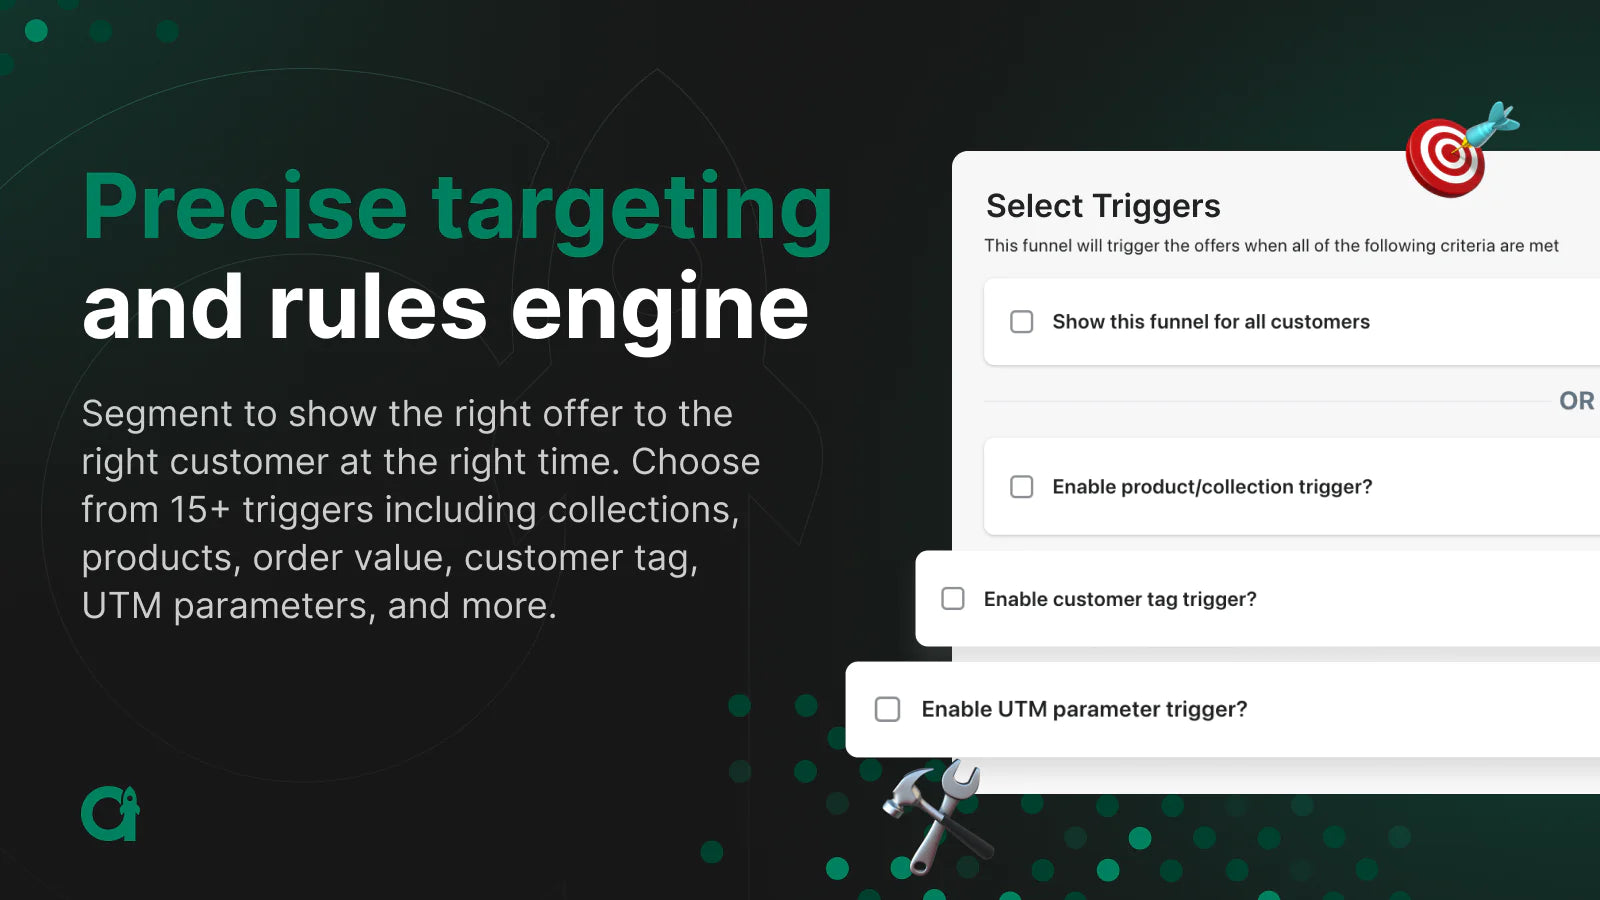 the image shows that you can precise targeting and rules engine